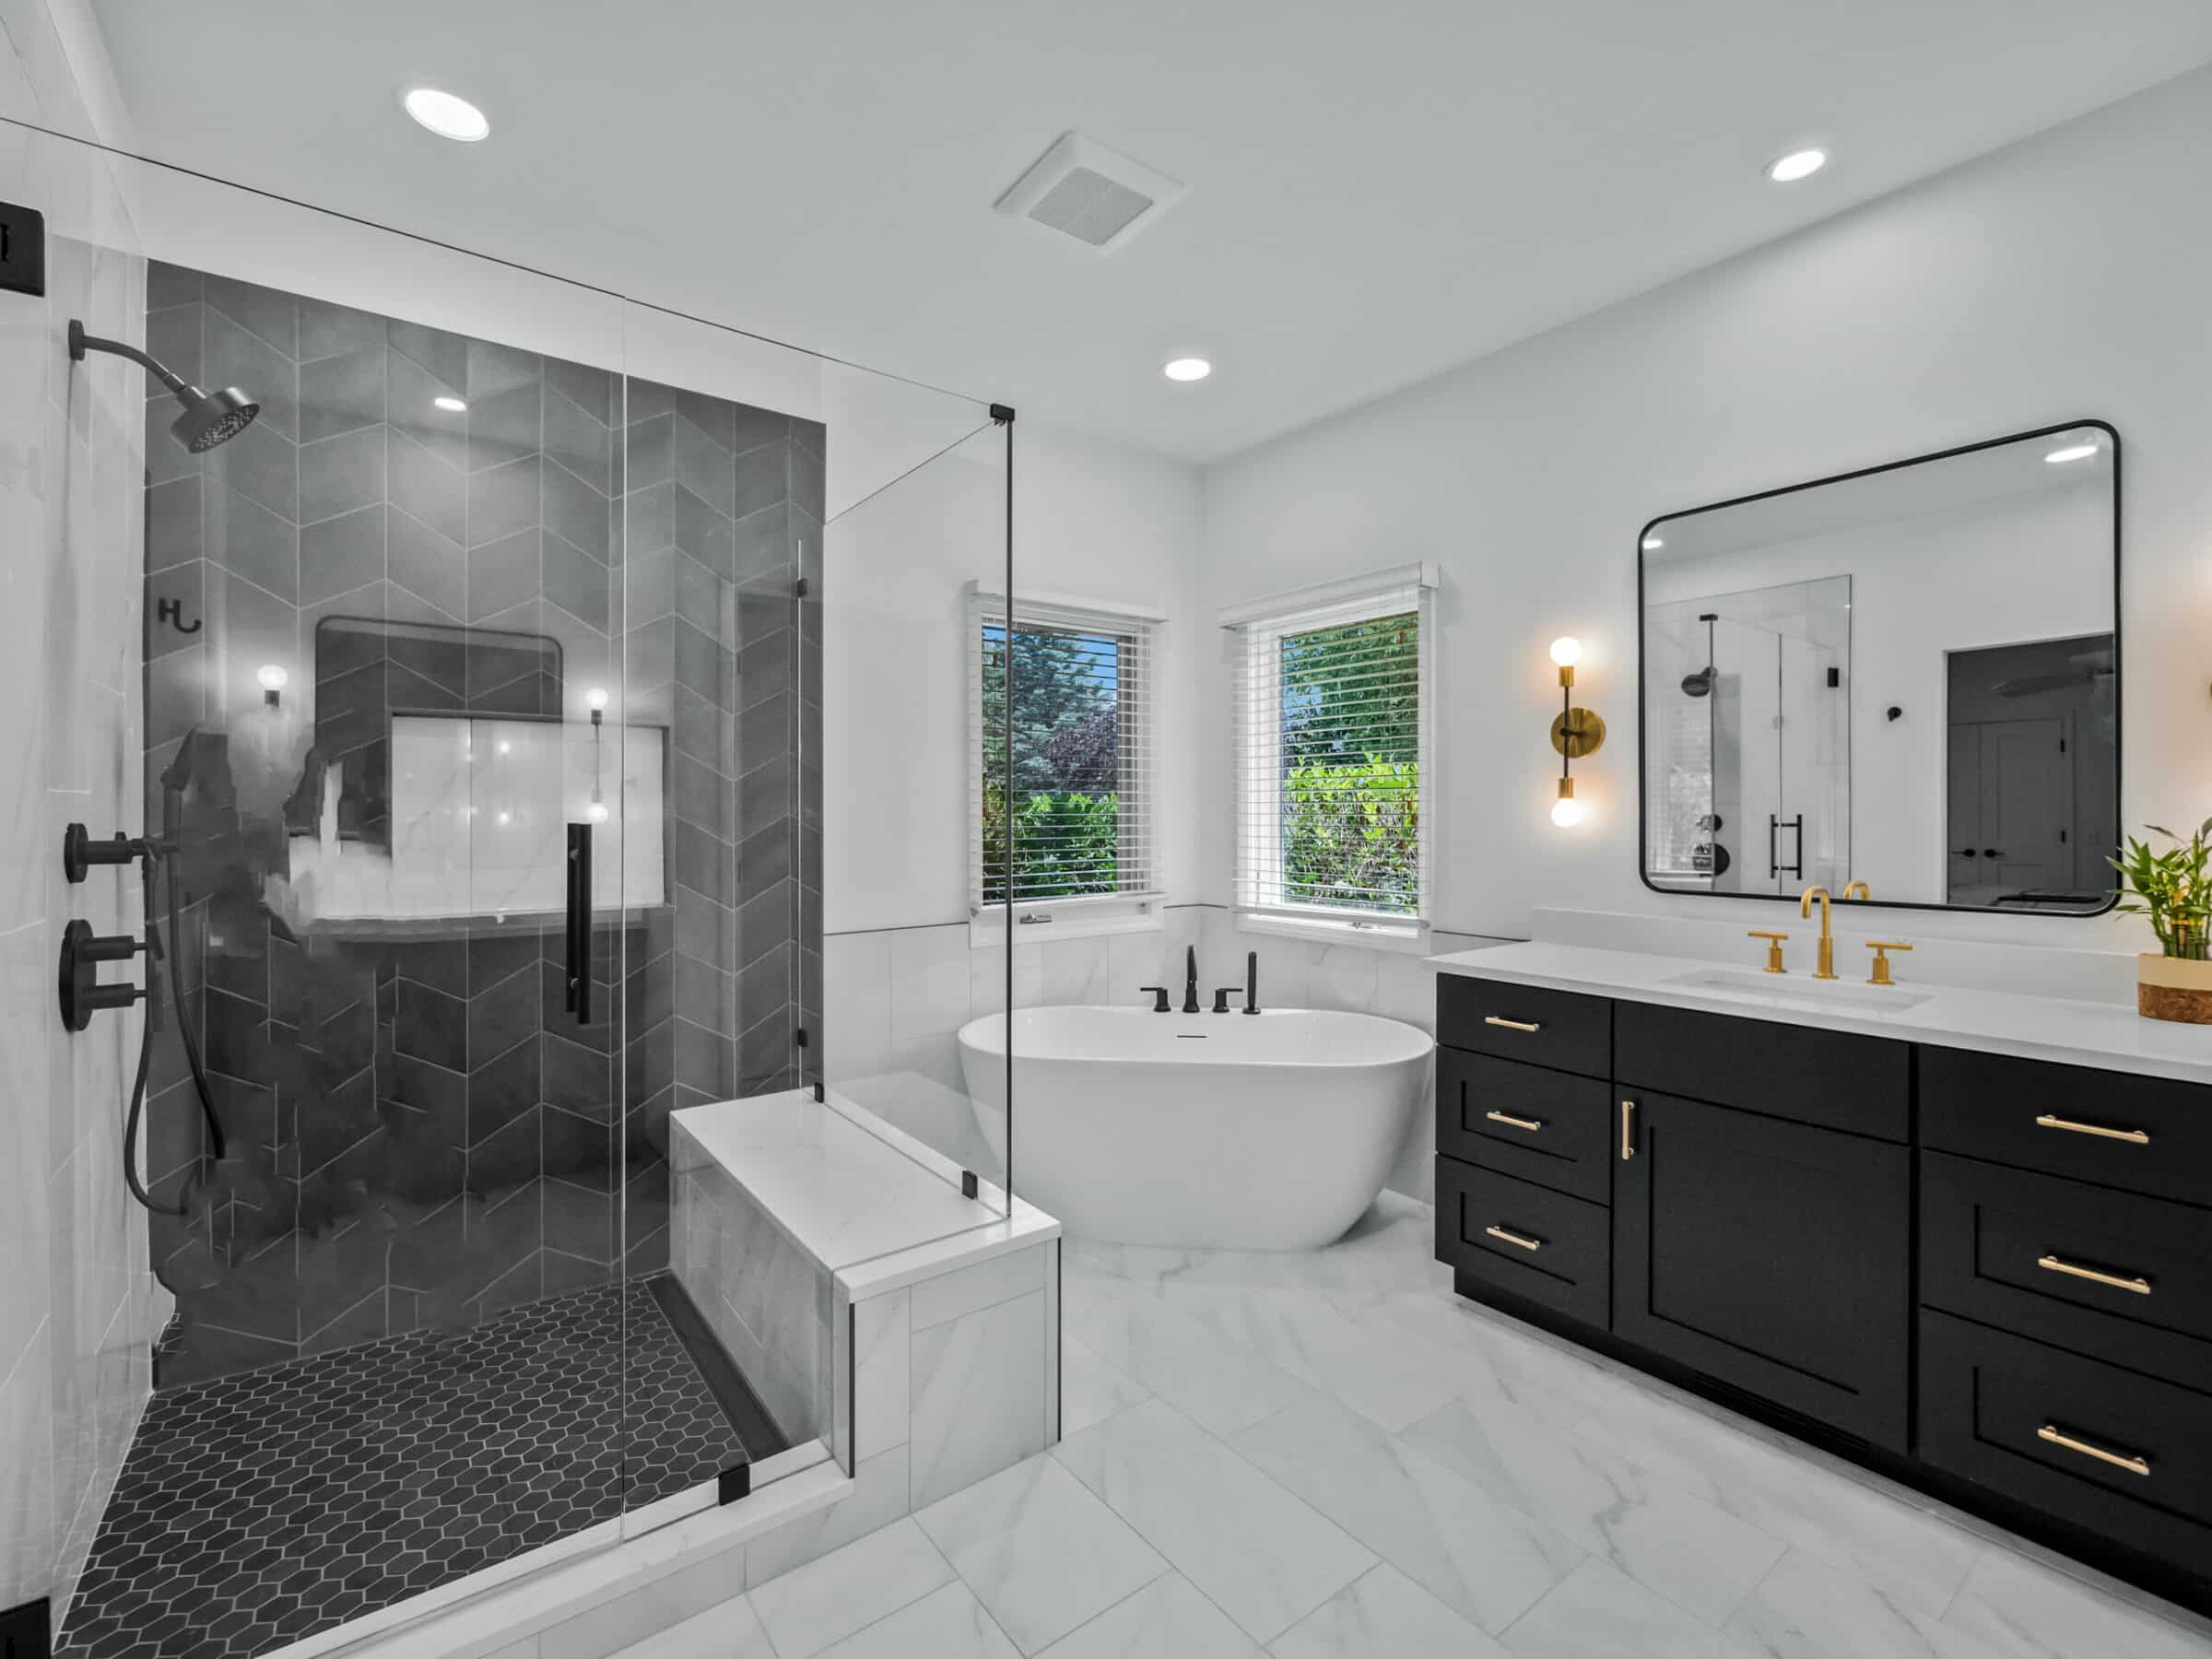 kitchen and bathroom remodeling michigan remodeling companies